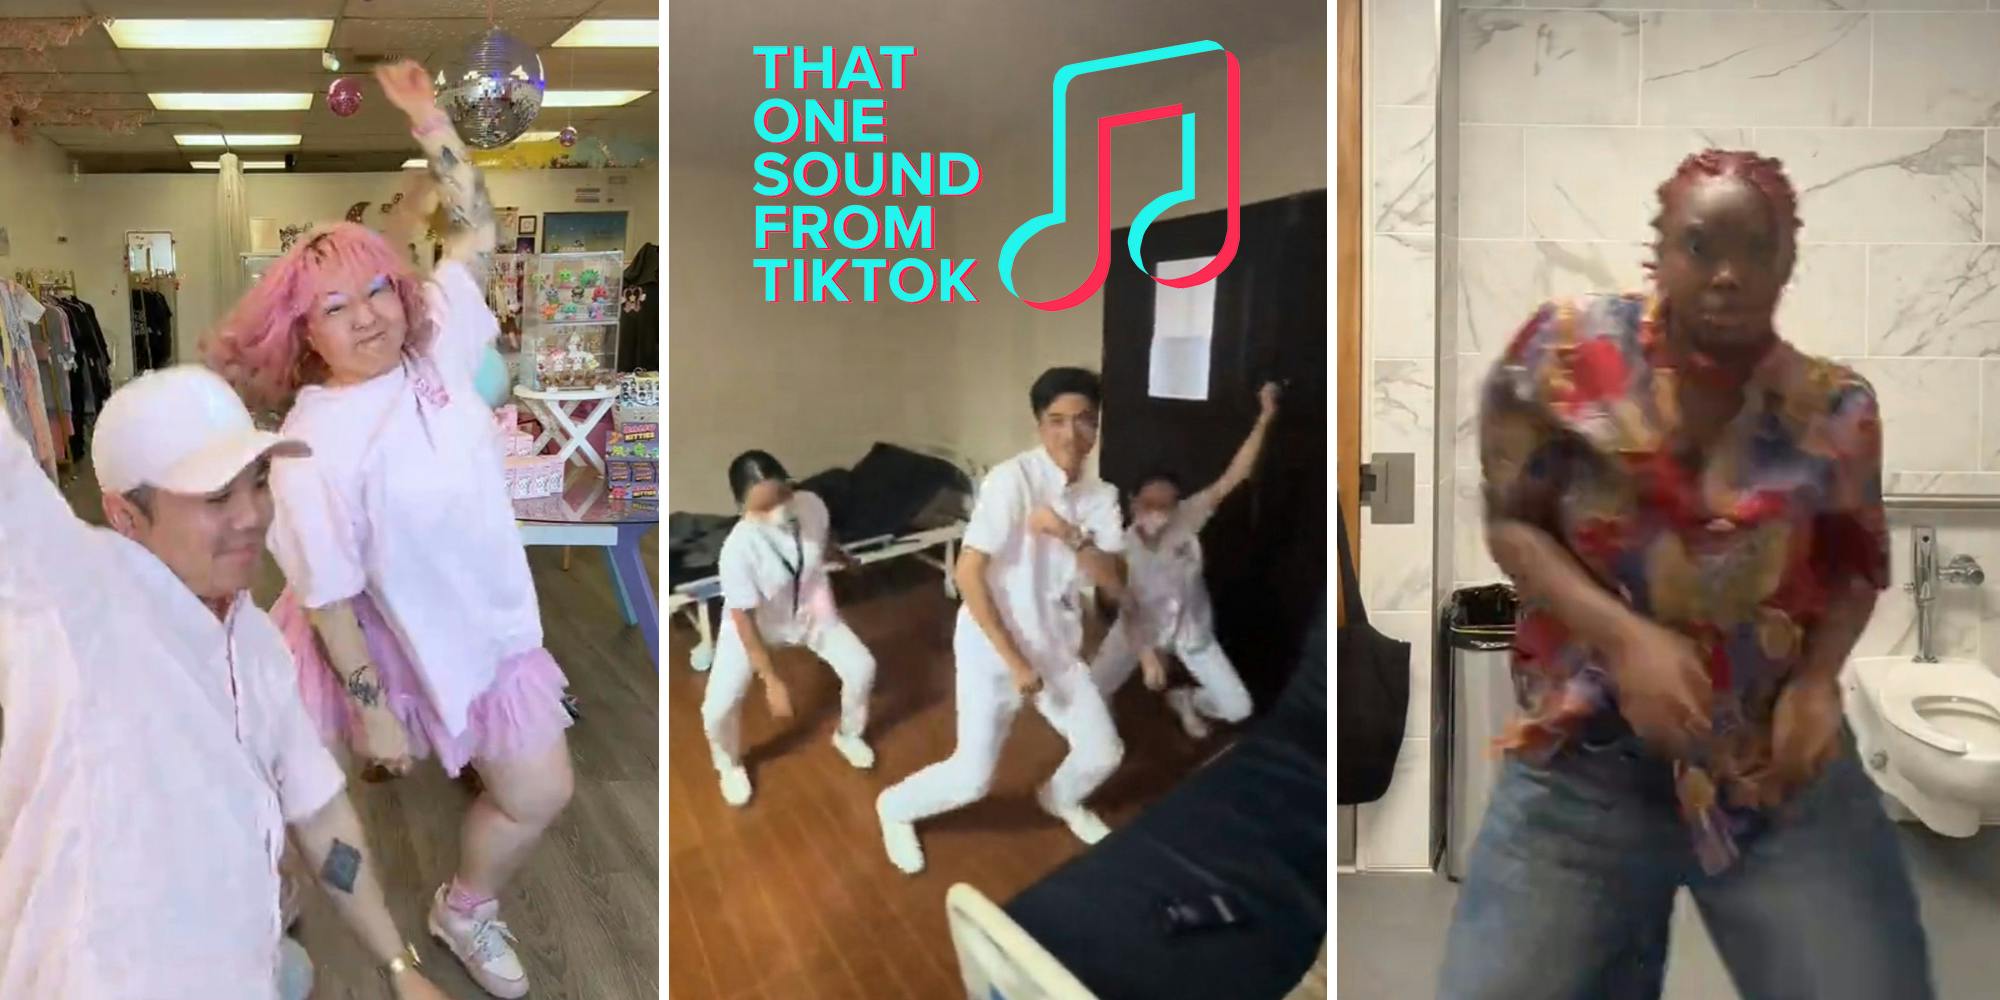 ‘Paging Dr Beat’: This remixed club classic from the ’80s is suddenly all over TikTok. Why?